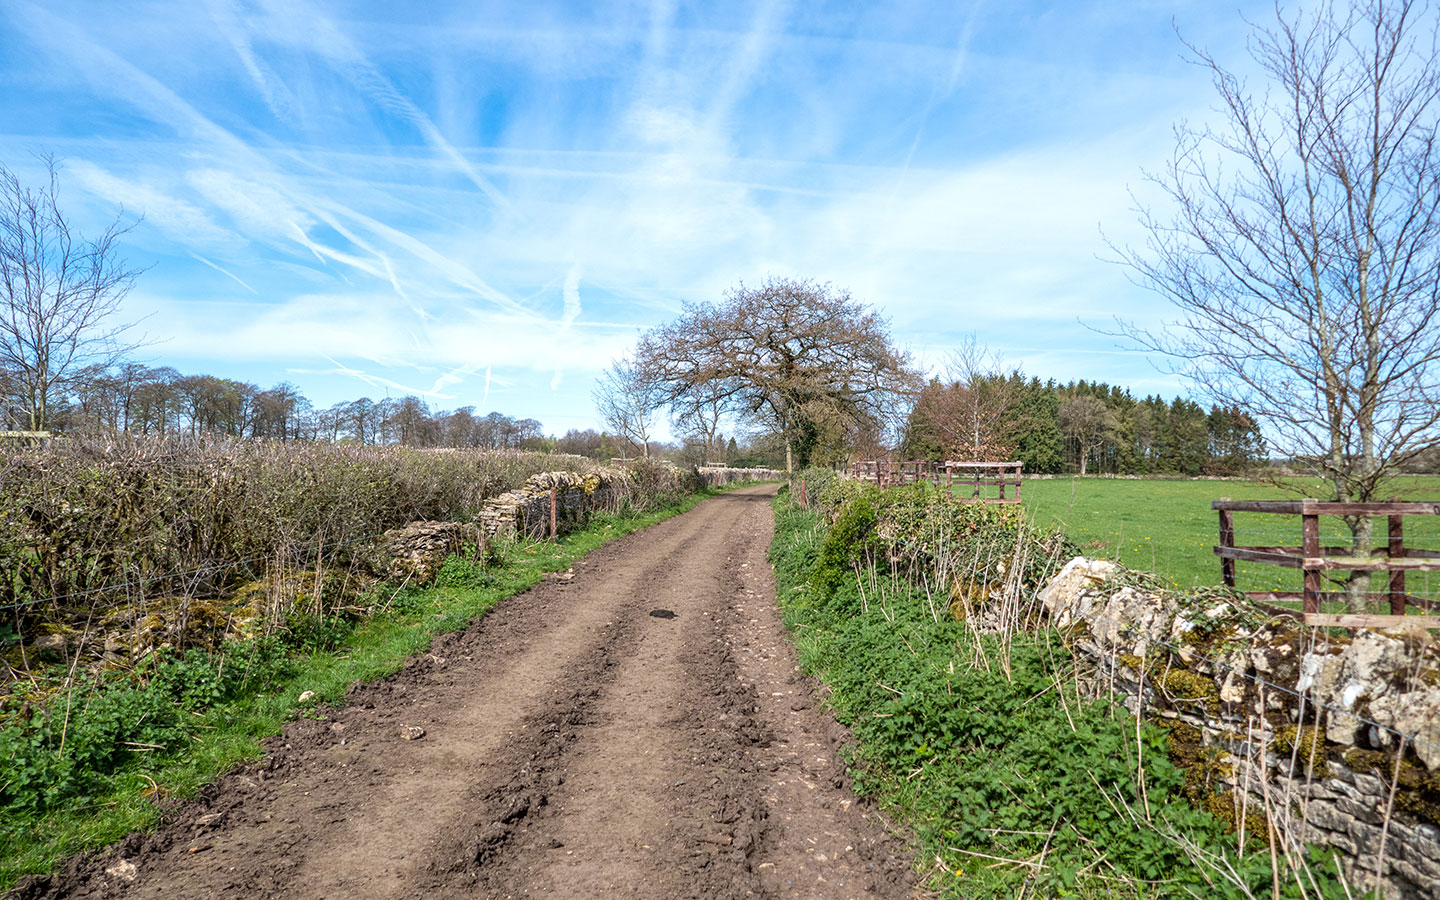 Track through farm on the Chedworth to Withington walk in the Cotswolds